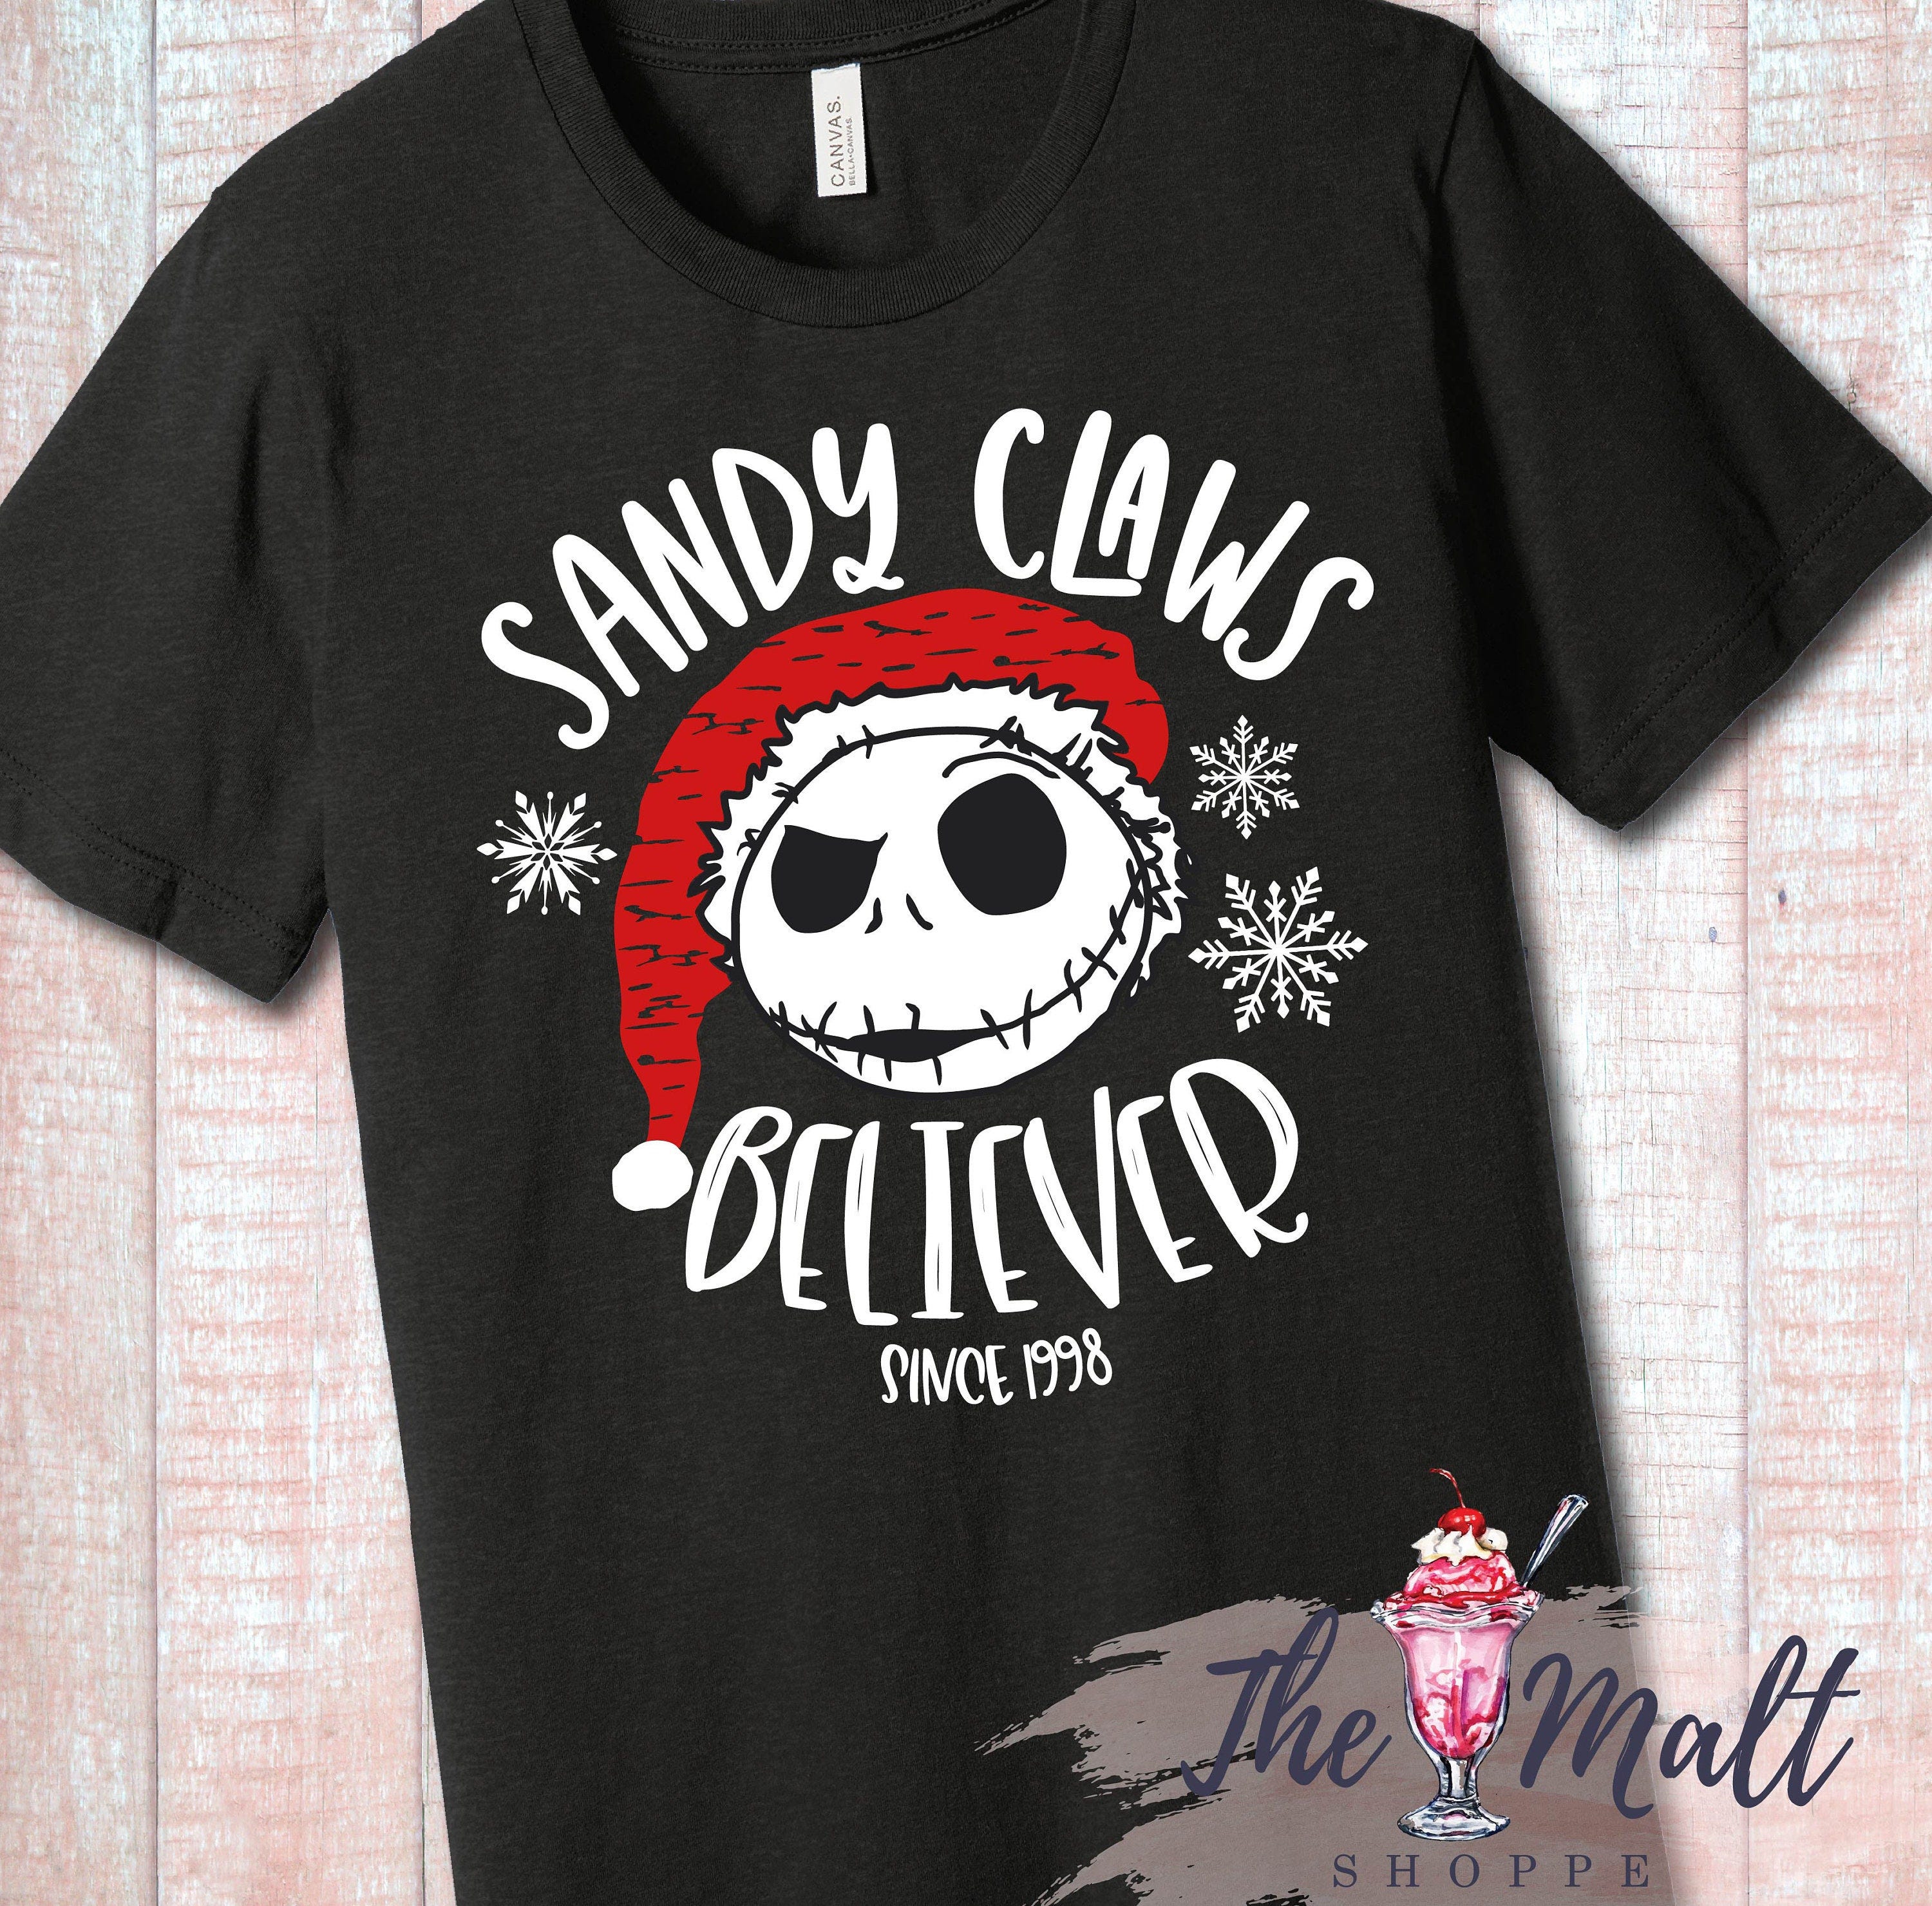 MALT SHOPPE Sandy Claws Believer Inspired by Nightmare Before Christmas Jack Skellington Youth Adult Tee